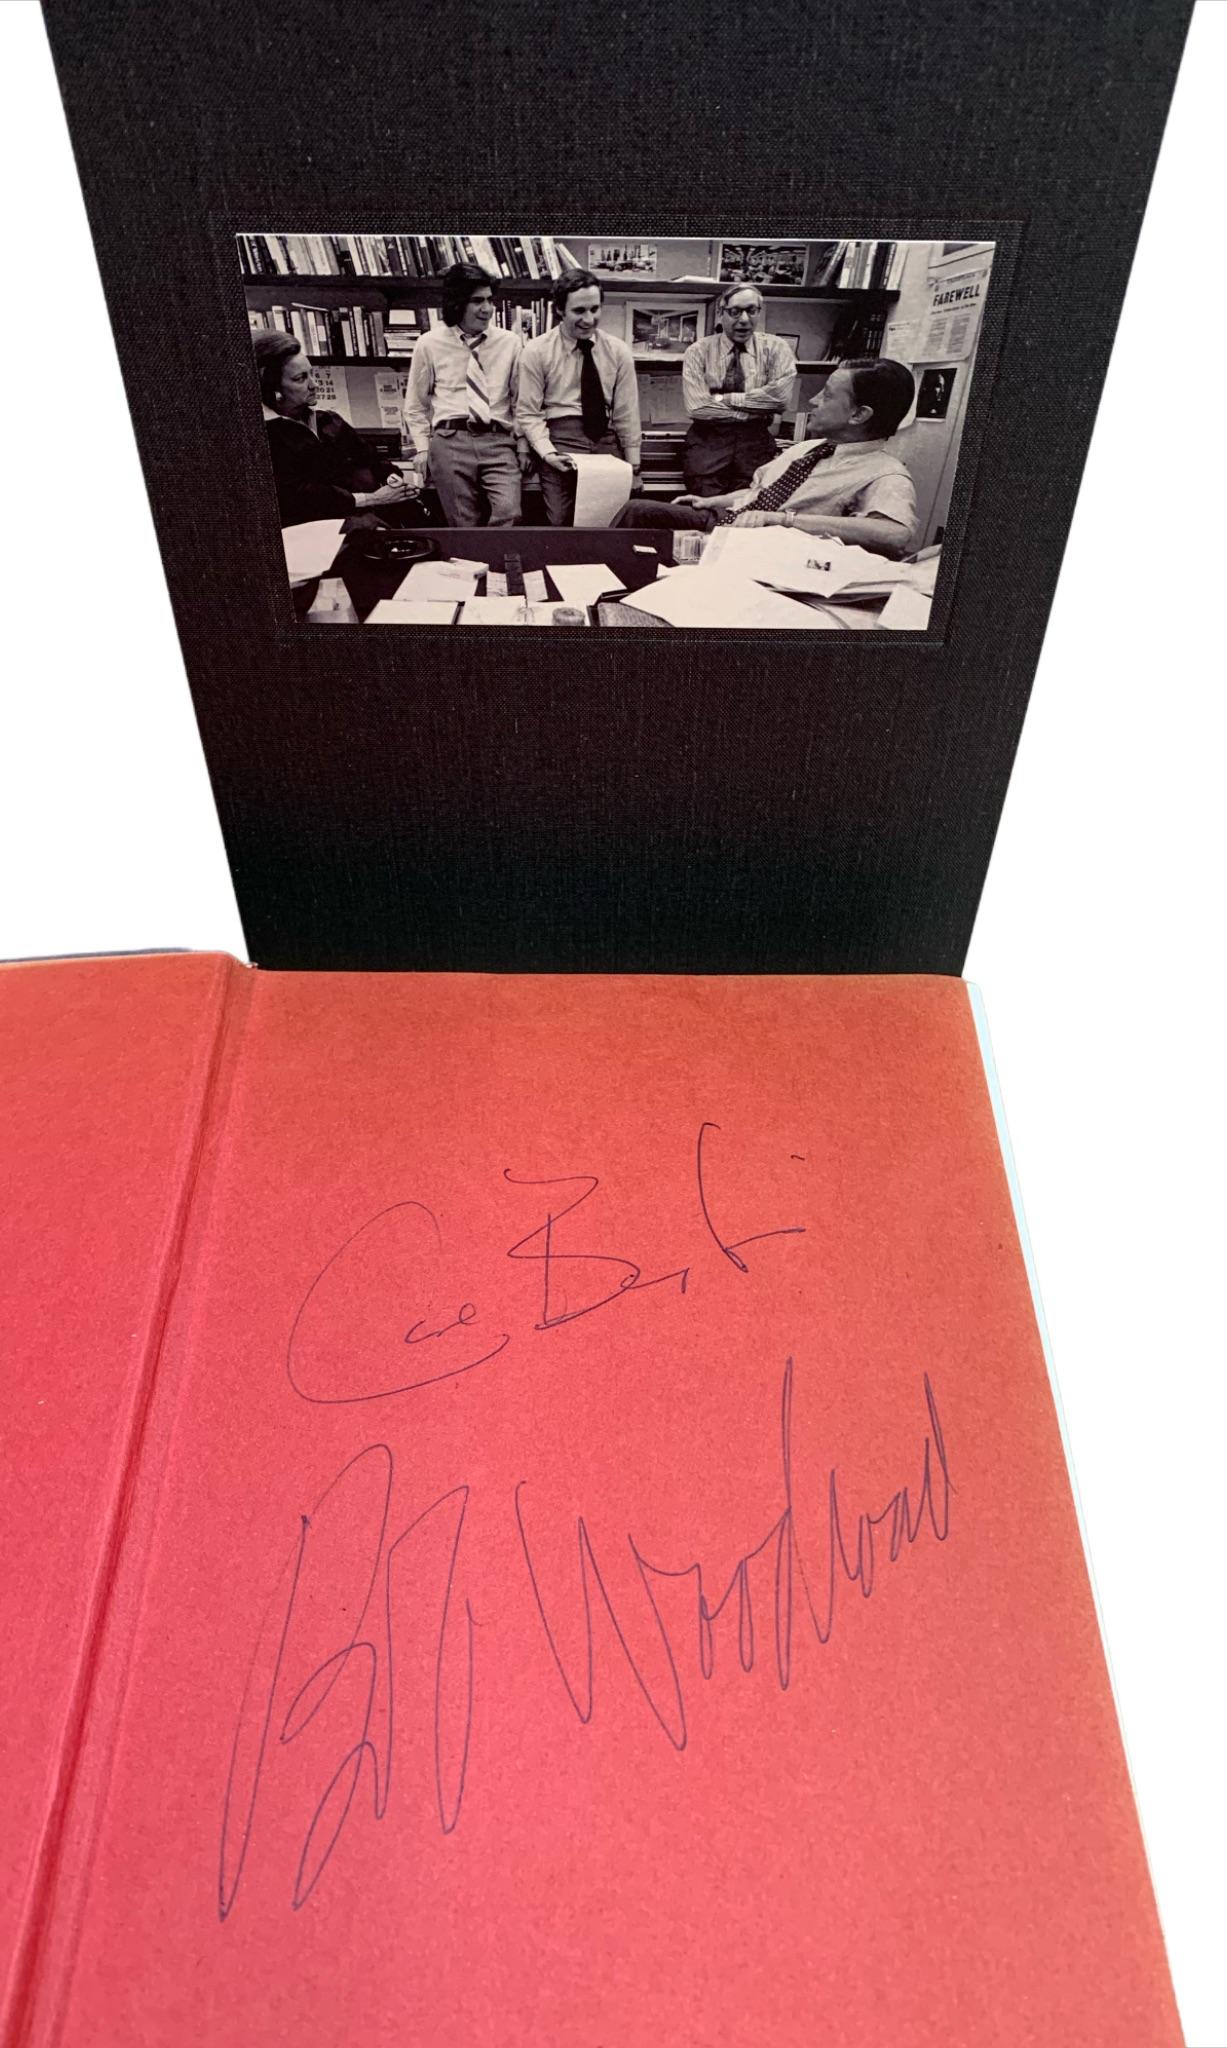 Woodward, Bob, Bernstein, Carl, All the President's Men. New York: Simon and Schuster, 1974. Signed by Bernstein and Woodward. First edition, fifth printing. Octovo. Original dust jacket with slipcase.
This first edition of All the President’s Men